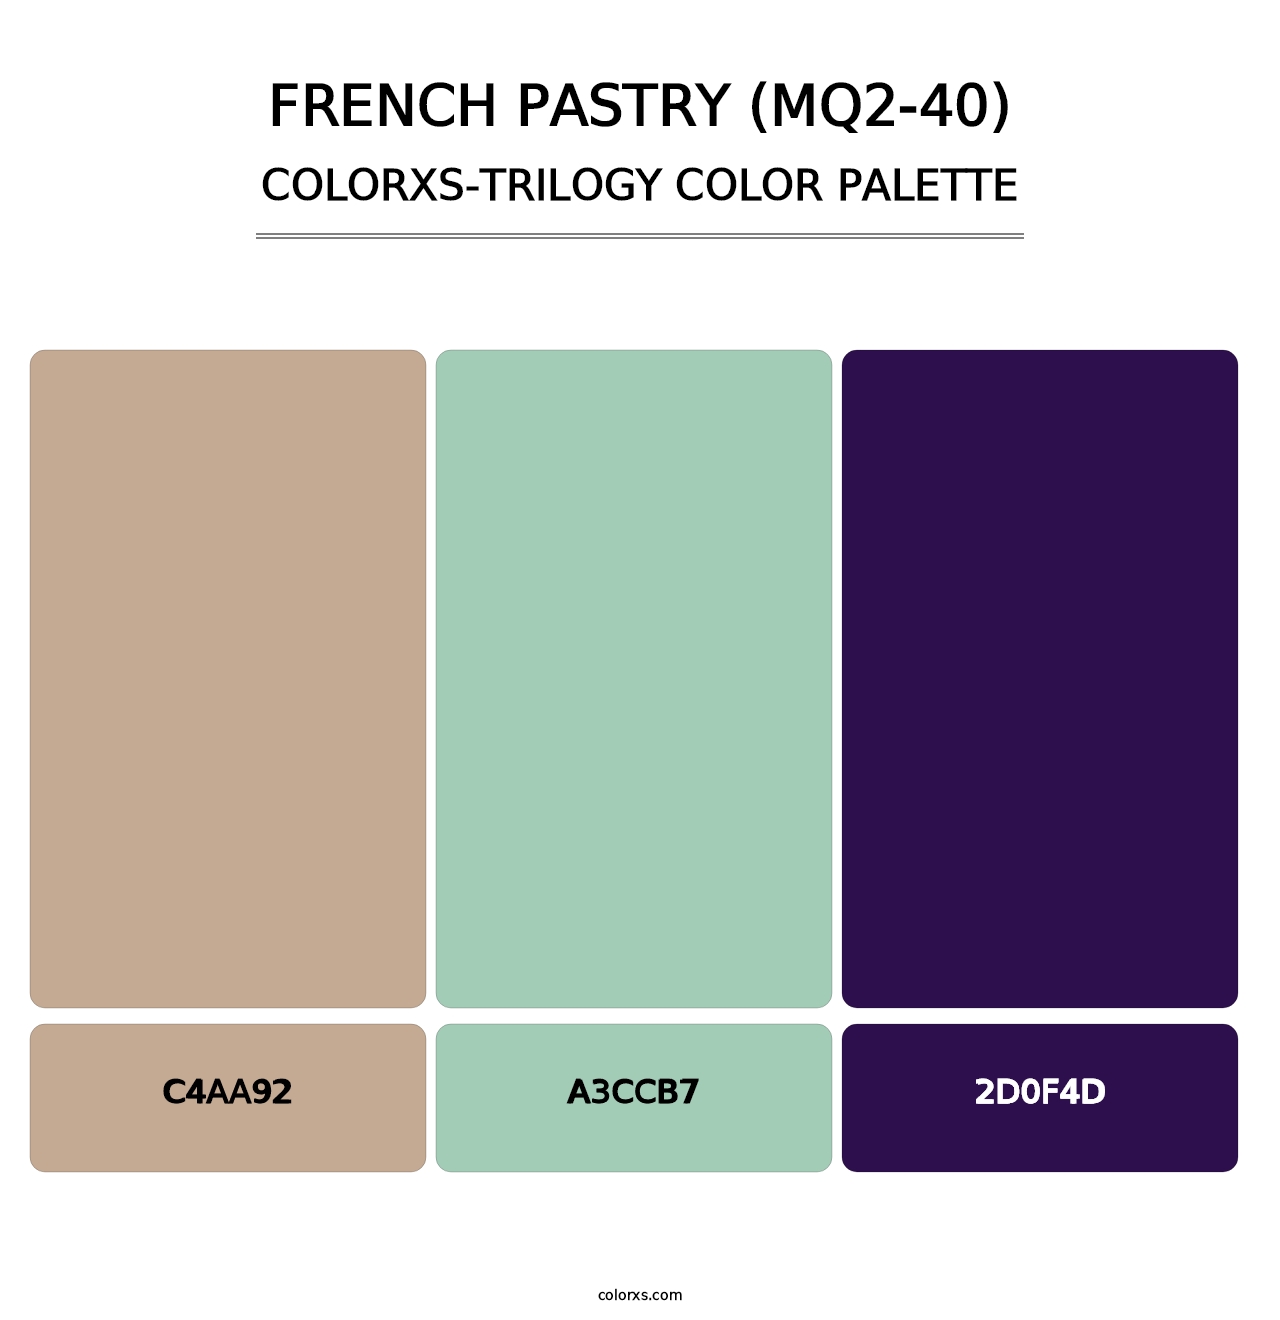 French Pastry (MQ2-40) - Colorxs Trilogy Palette